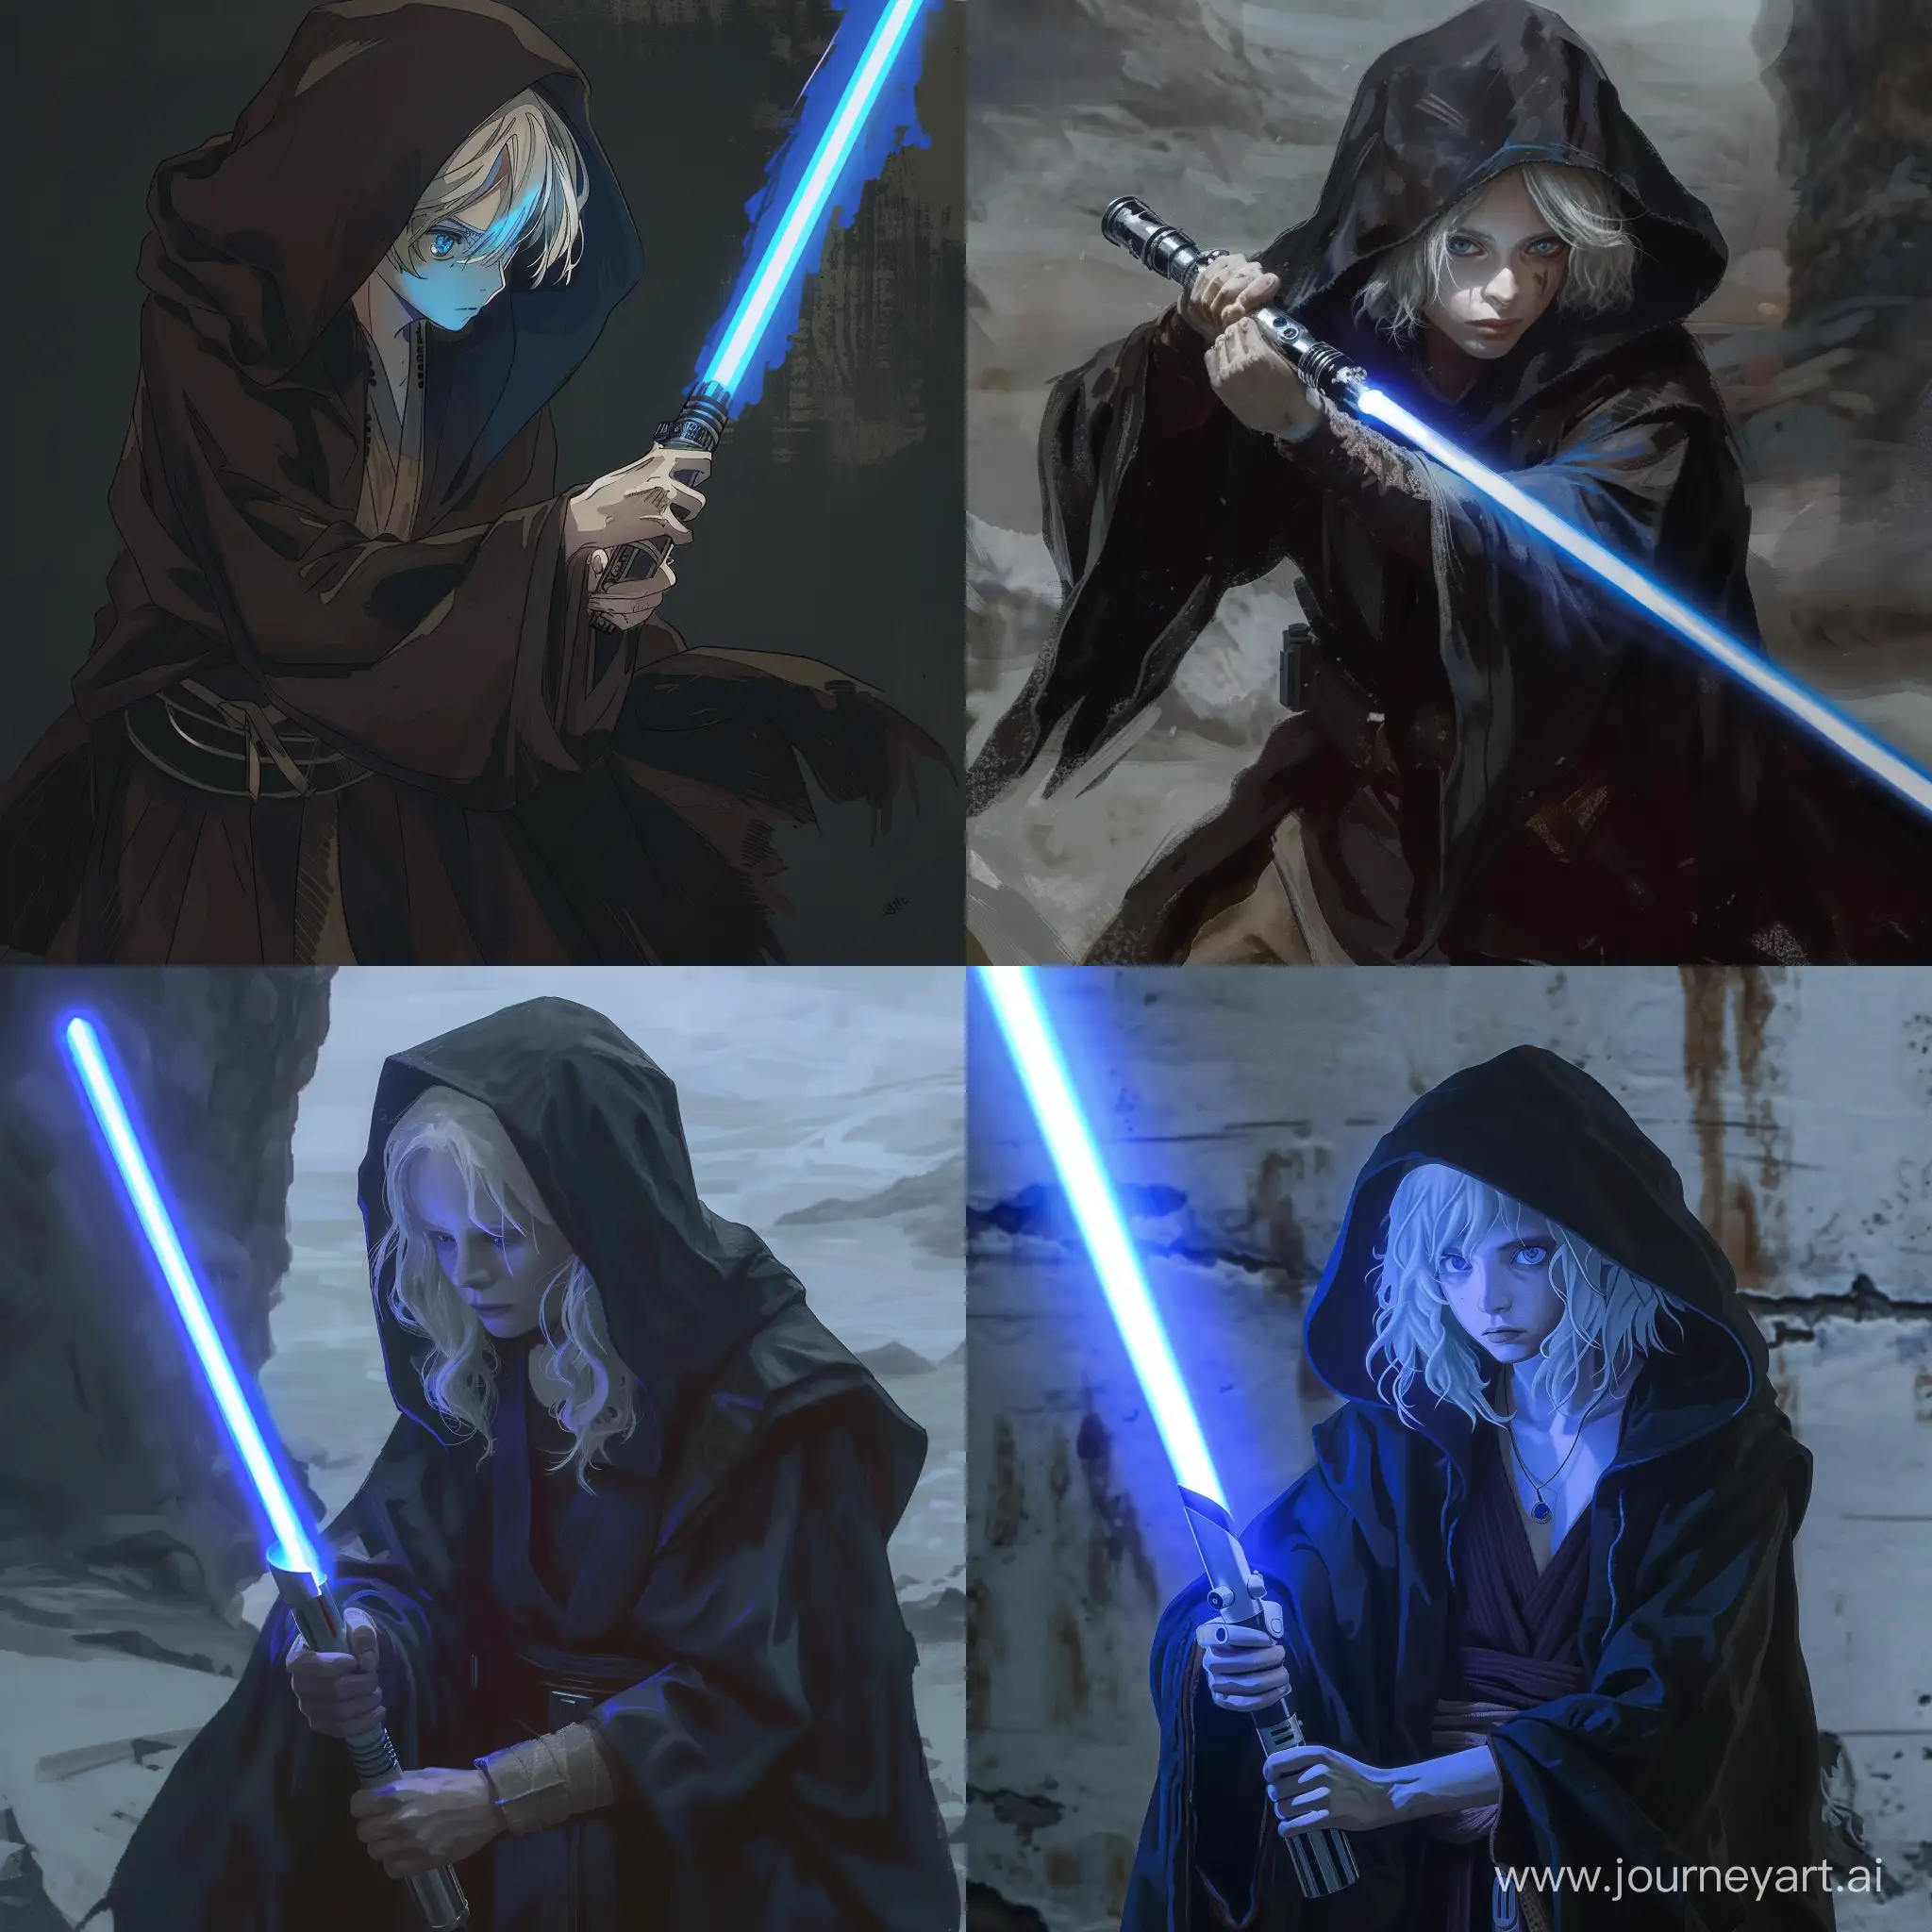 jedi padawan with pale hair in a dark robe and in the hood, holding a blue lightsaber, anime style